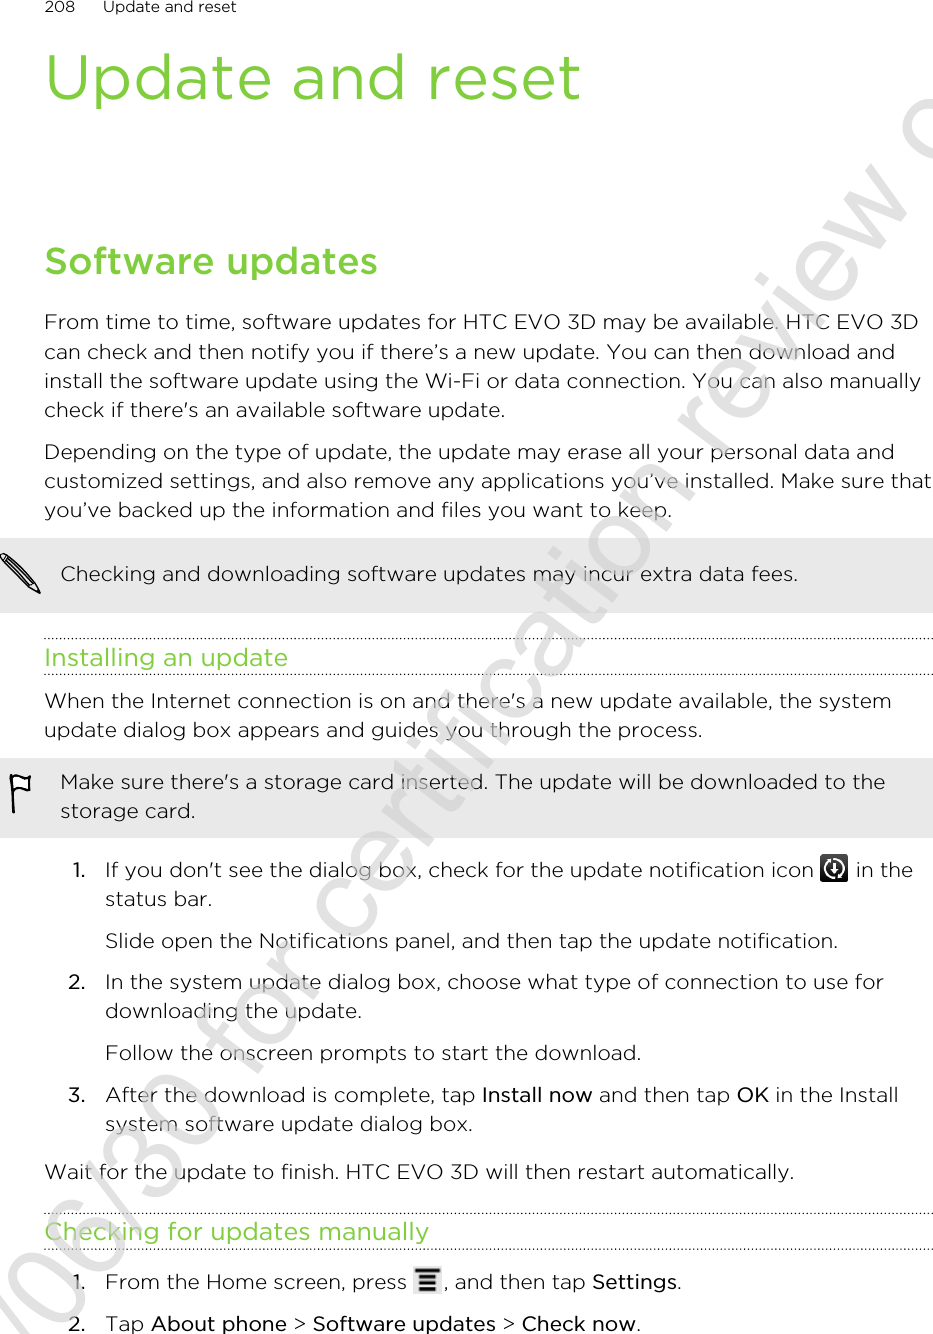 Update and resetSoftware updatesFrom time to time, software updates for HTC EVO 3D may be available. HTC EVO 3Dcan check and then notify you if there’s a new update. You can then download andinstall the software update using the Wi-Fi or data connection. You can also manuallycheck if there&apos;s an available software update.Depending on the type of update, the update may erase all your personal data andcustomized settings, and also remove any applications you’ve installed. Make sure thatyou’ve backed up the information and files you want to keep.Checking and downloading software updates may incur extra data fees.Installing an updateWhen the Internet connection is on and there&apos;s a new update available, the systemupdate dialog box appears and guides you through the process.Make sure there&apos;s a storage card inserted. The update will be downloaded to thestorage card.1. If you don&apos;t see the dialog box, check for the update notification icon   in thestatus bar. Slide open the Notifications panel, and then tap the update notification.2. In the system update dialog box, choose what type of connection to use fordownloading the update. Follow the onscreen prompts to start the download.3. After the download is complete, tap Install now and then tap OK in the Installsystem software update dialog box.Wait for the update to finish. HTC EVO 3D will then restart automatically.Checking for updates manually1. From the Home screen, press  , and then tap Settings.2. Tap About phone &gt; Software updates &gt; Check now.208 Update and reset2011/06/30 for certification review only